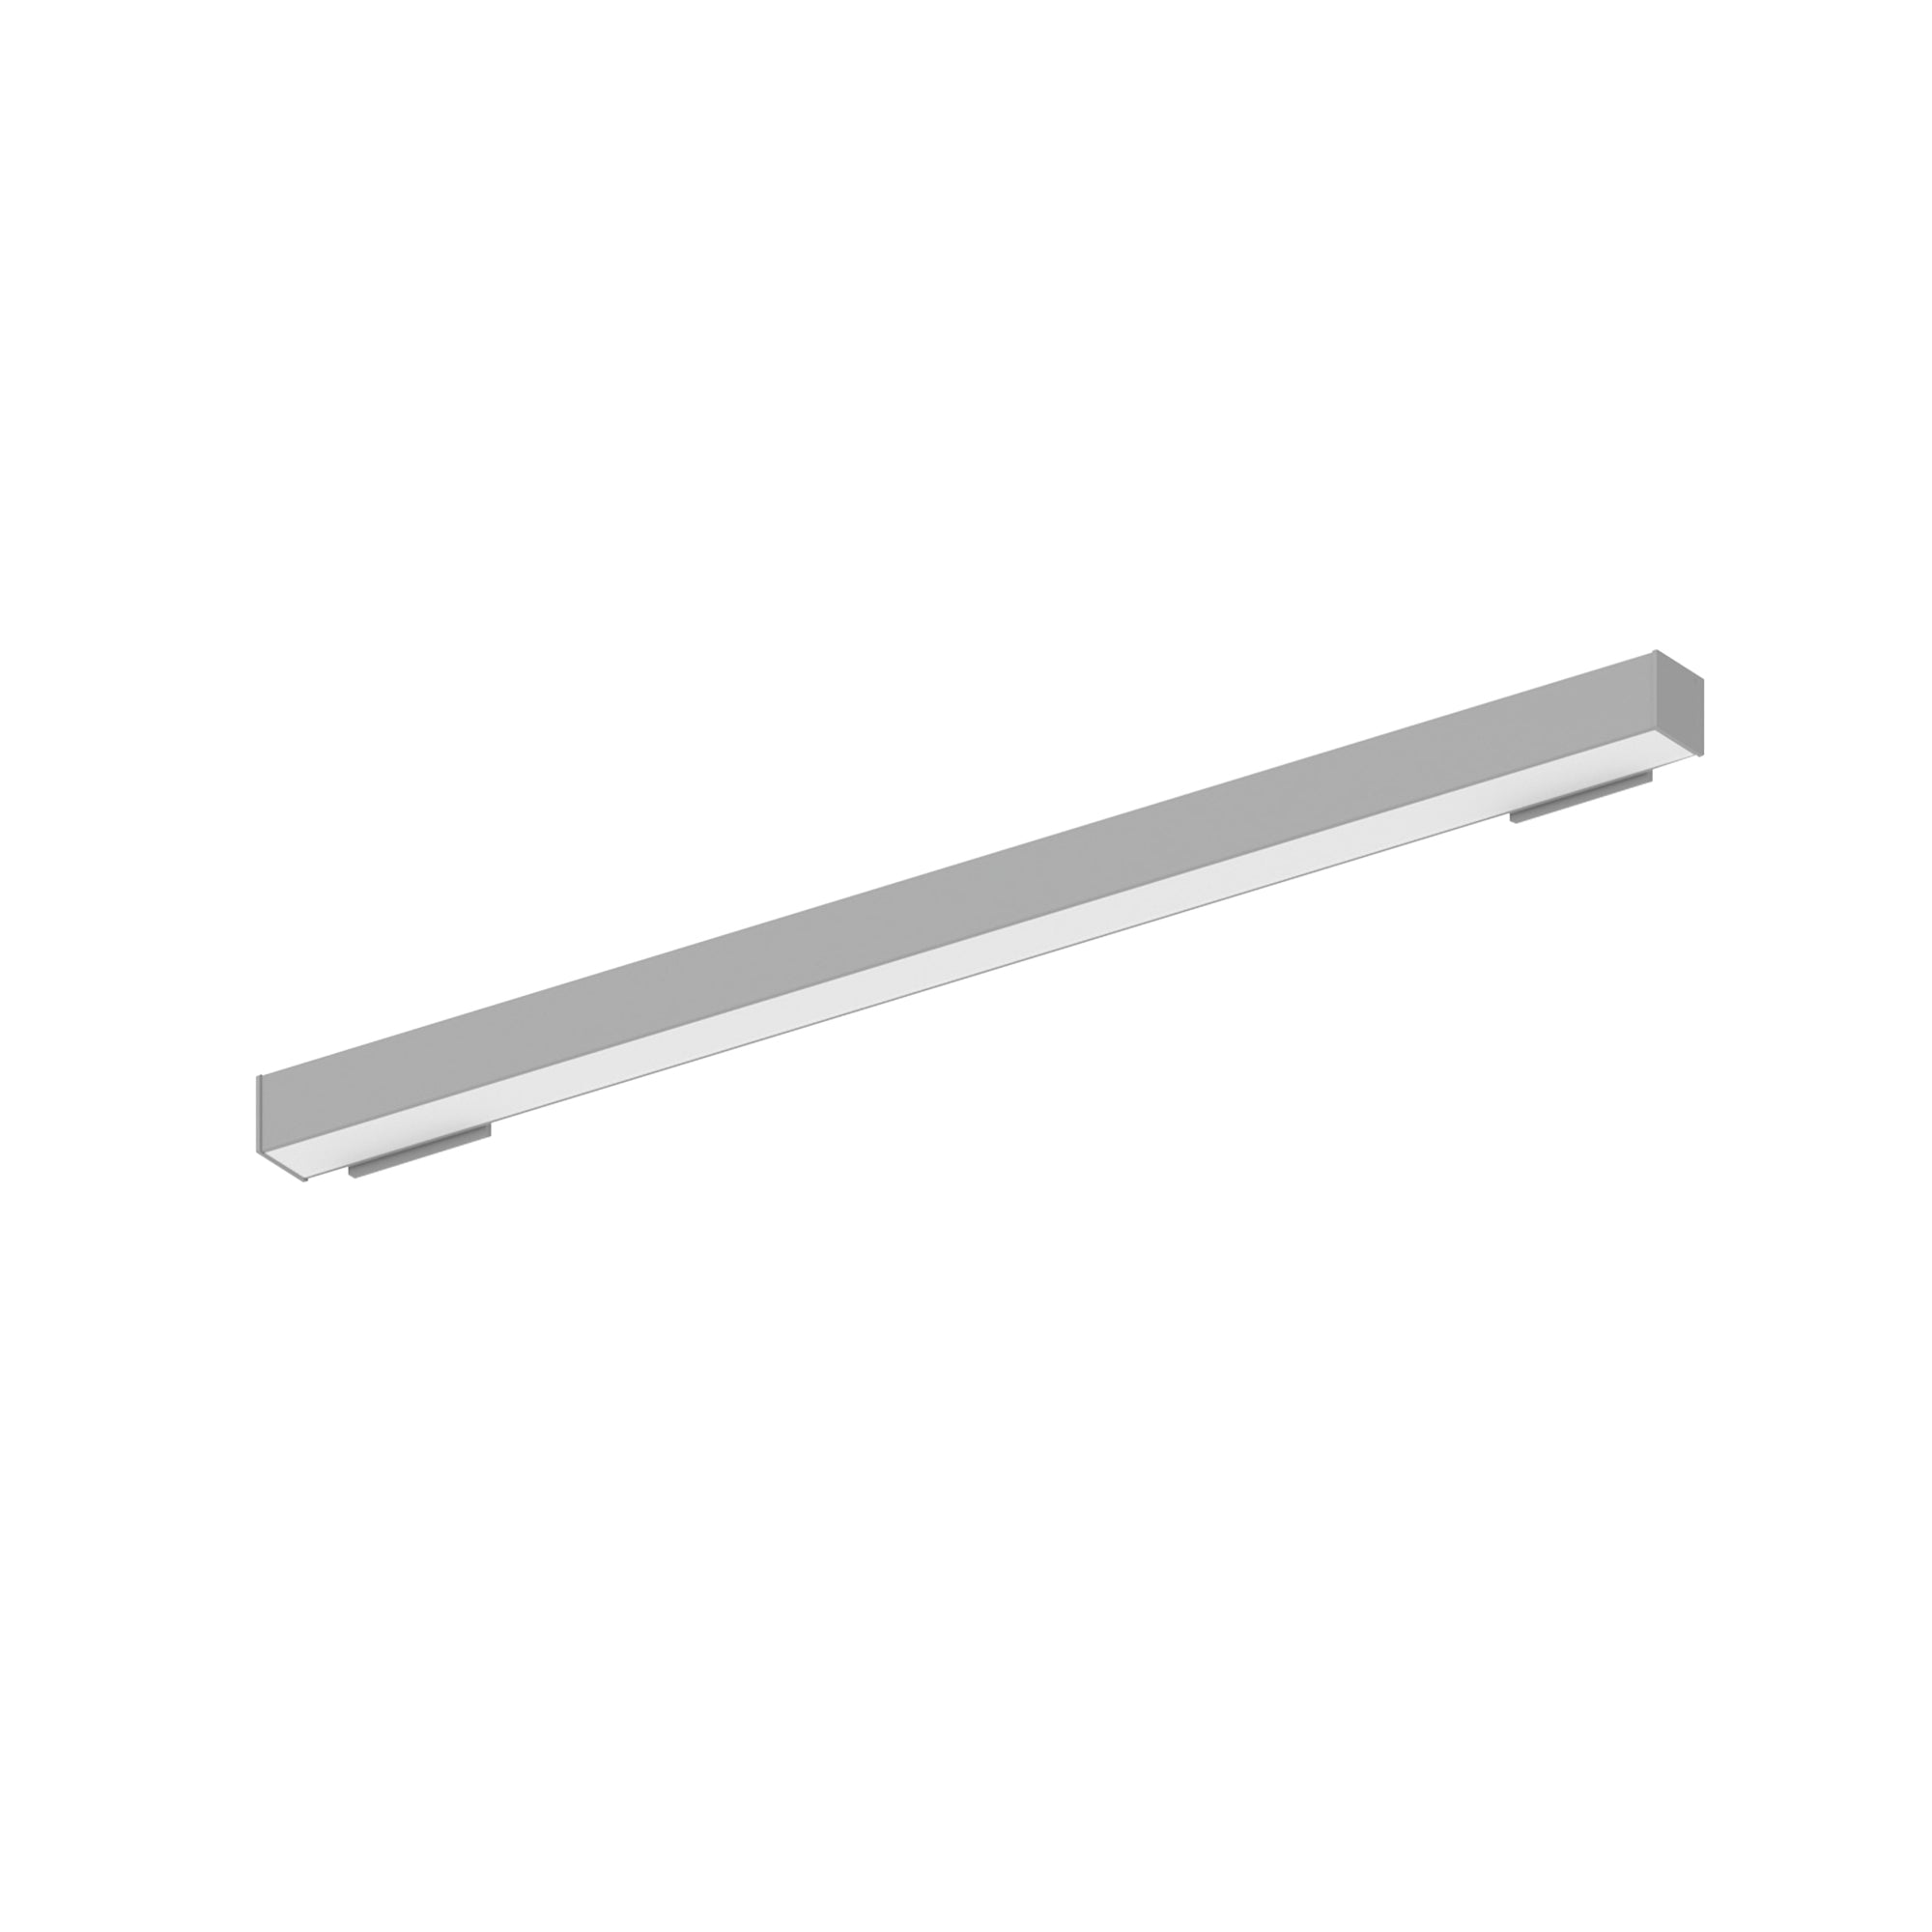 Nora Lighting NWLIN-41030A/L2P-R2 - Linear - 4' L-Line LED Wall Mount Linear, 4200lm / 3000K, 2 Inchx4 Inch Left Plate & 2 Inchx4 Inch Right Plate, Left Power Feed, Aluminum Finish